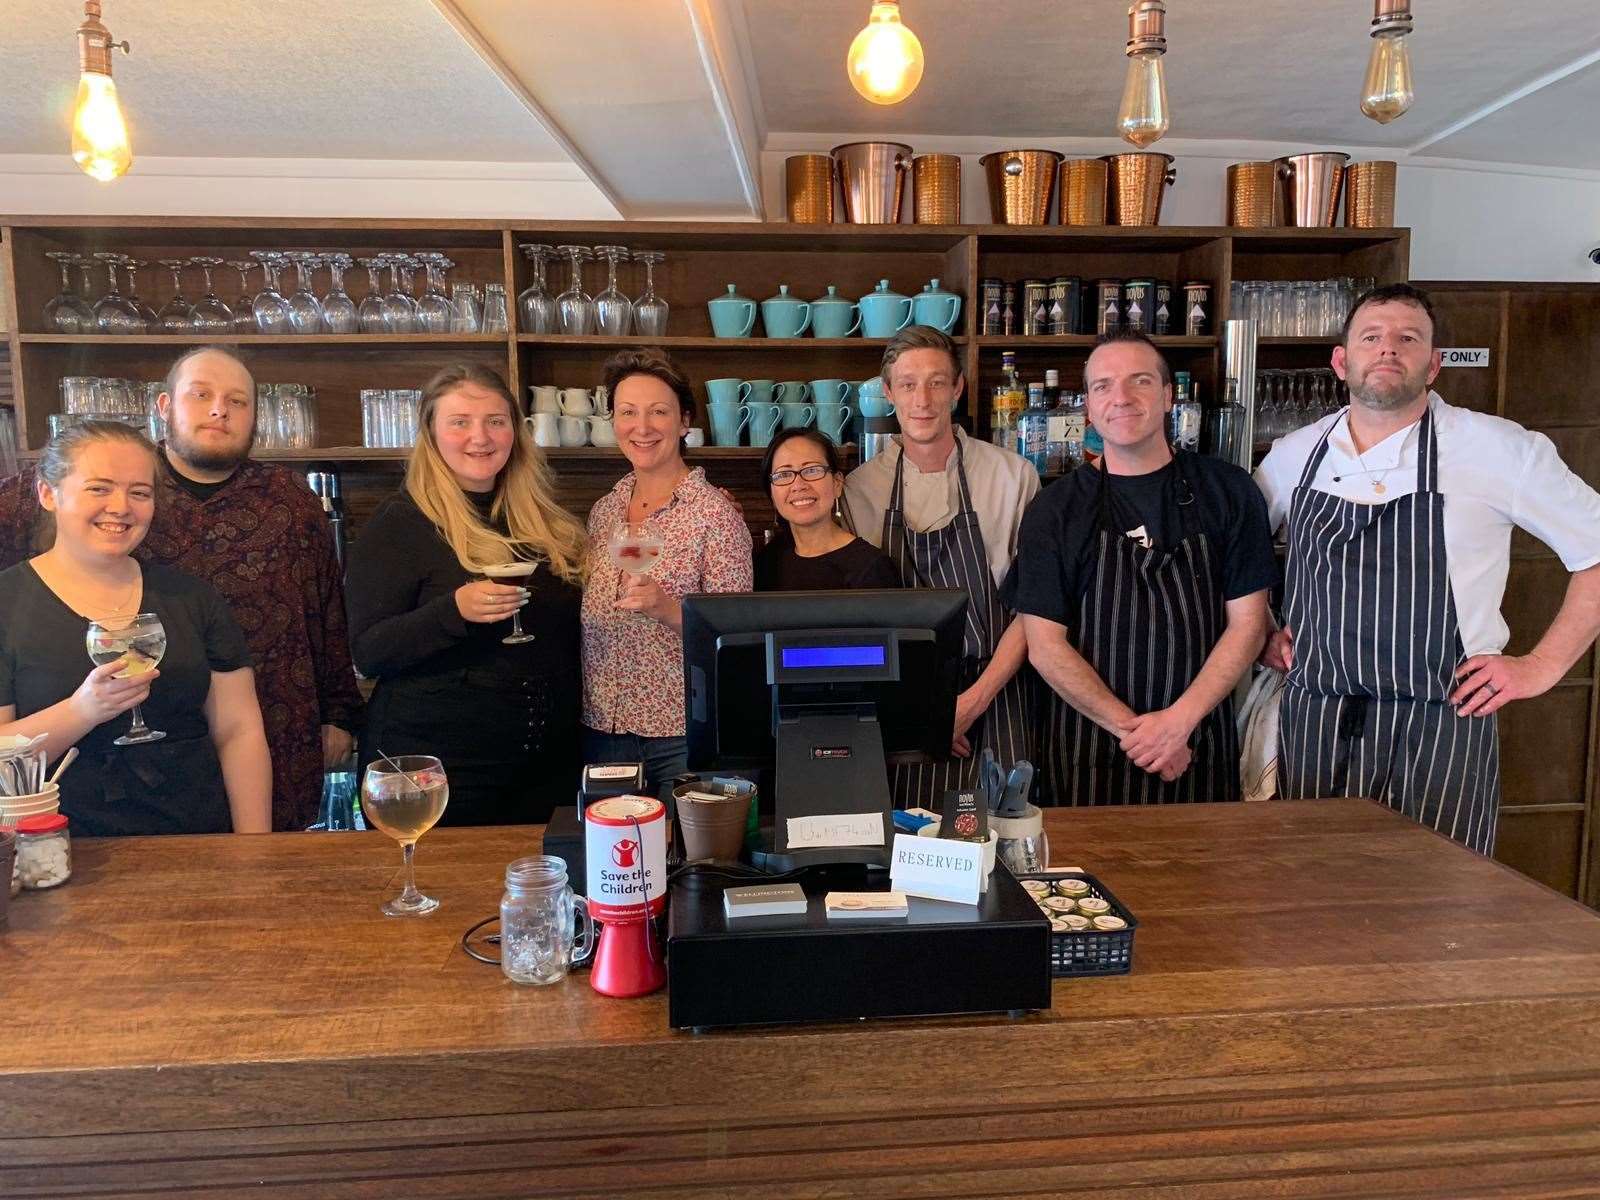 Sharon Cullen and her team at Wellington's have set up a GoFundMe page